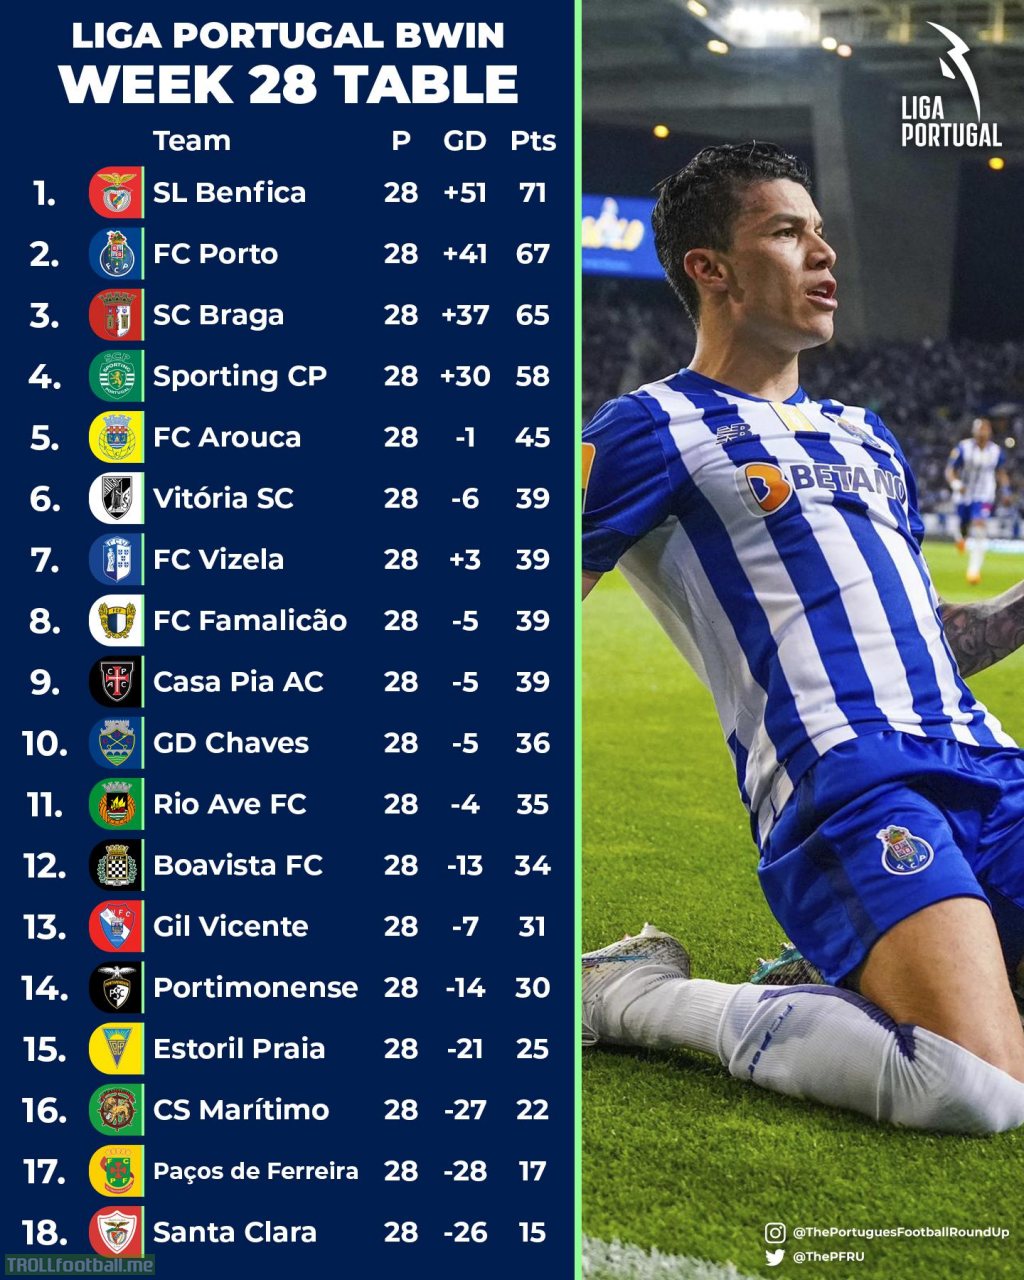 The Liga Portugal league table ahead of Matchday 29